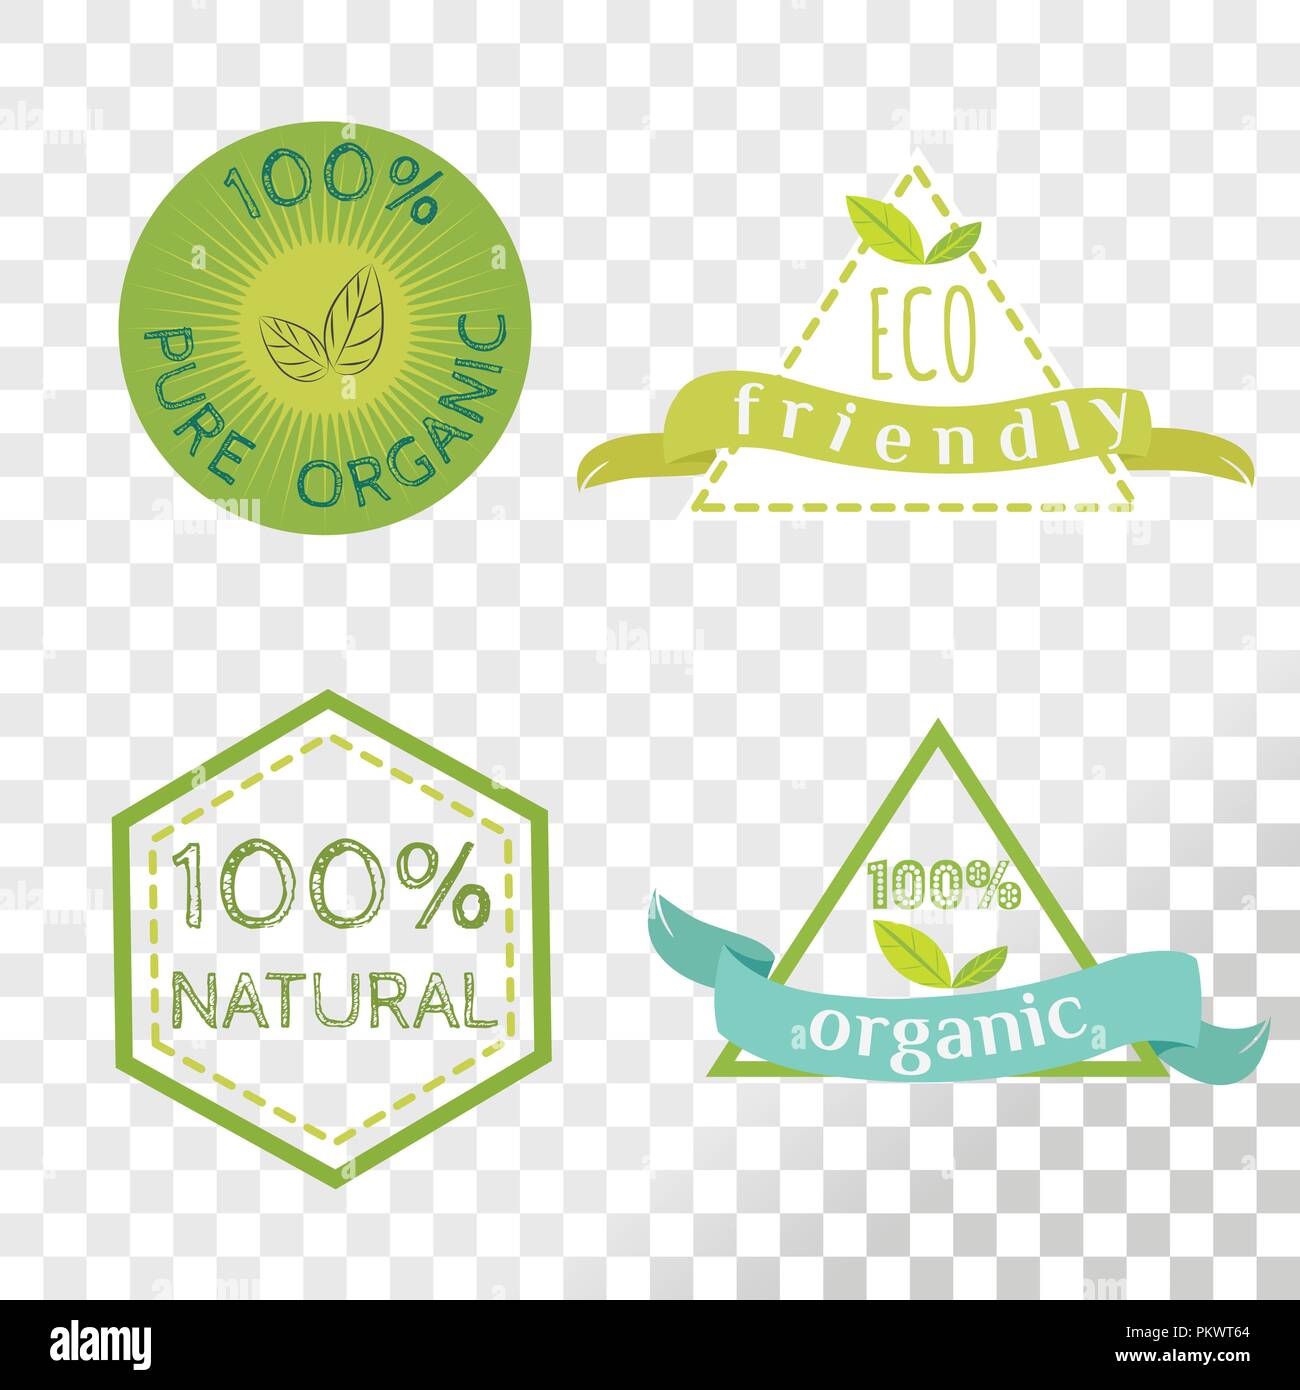 Organic labels collection isolated on transparent background. Emblems for healthy and safe products. Stock Vector